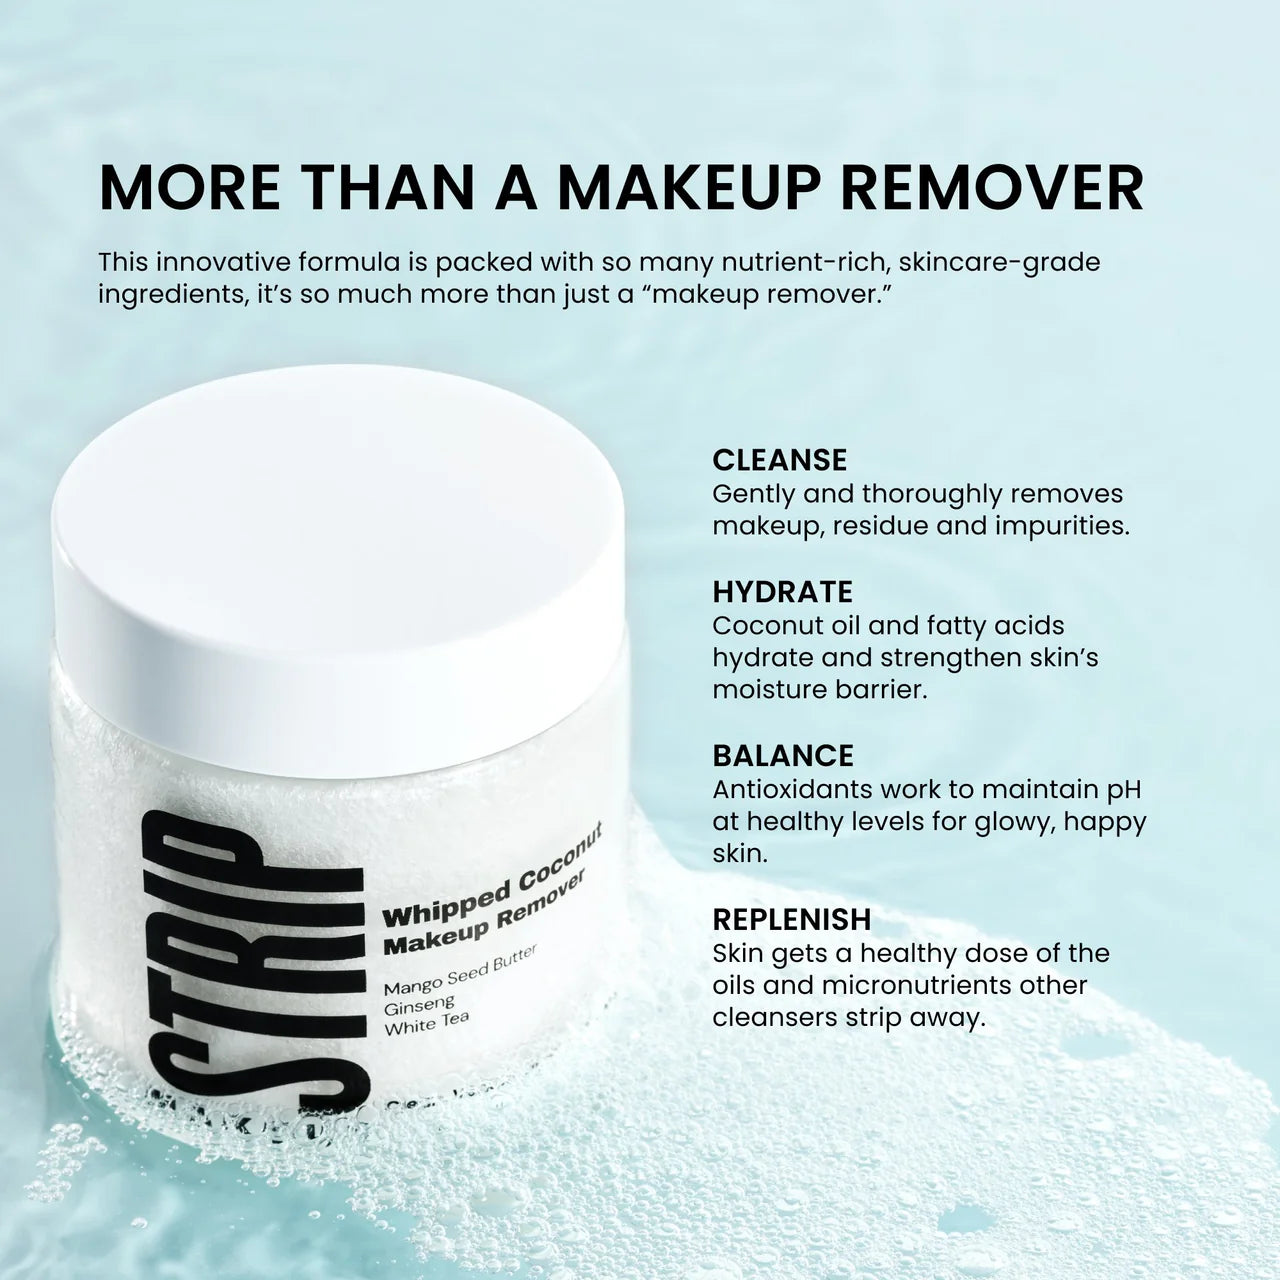 Strip Makeup Whipped Coconut Makeup Remover 100 ml / 3.4 oz.